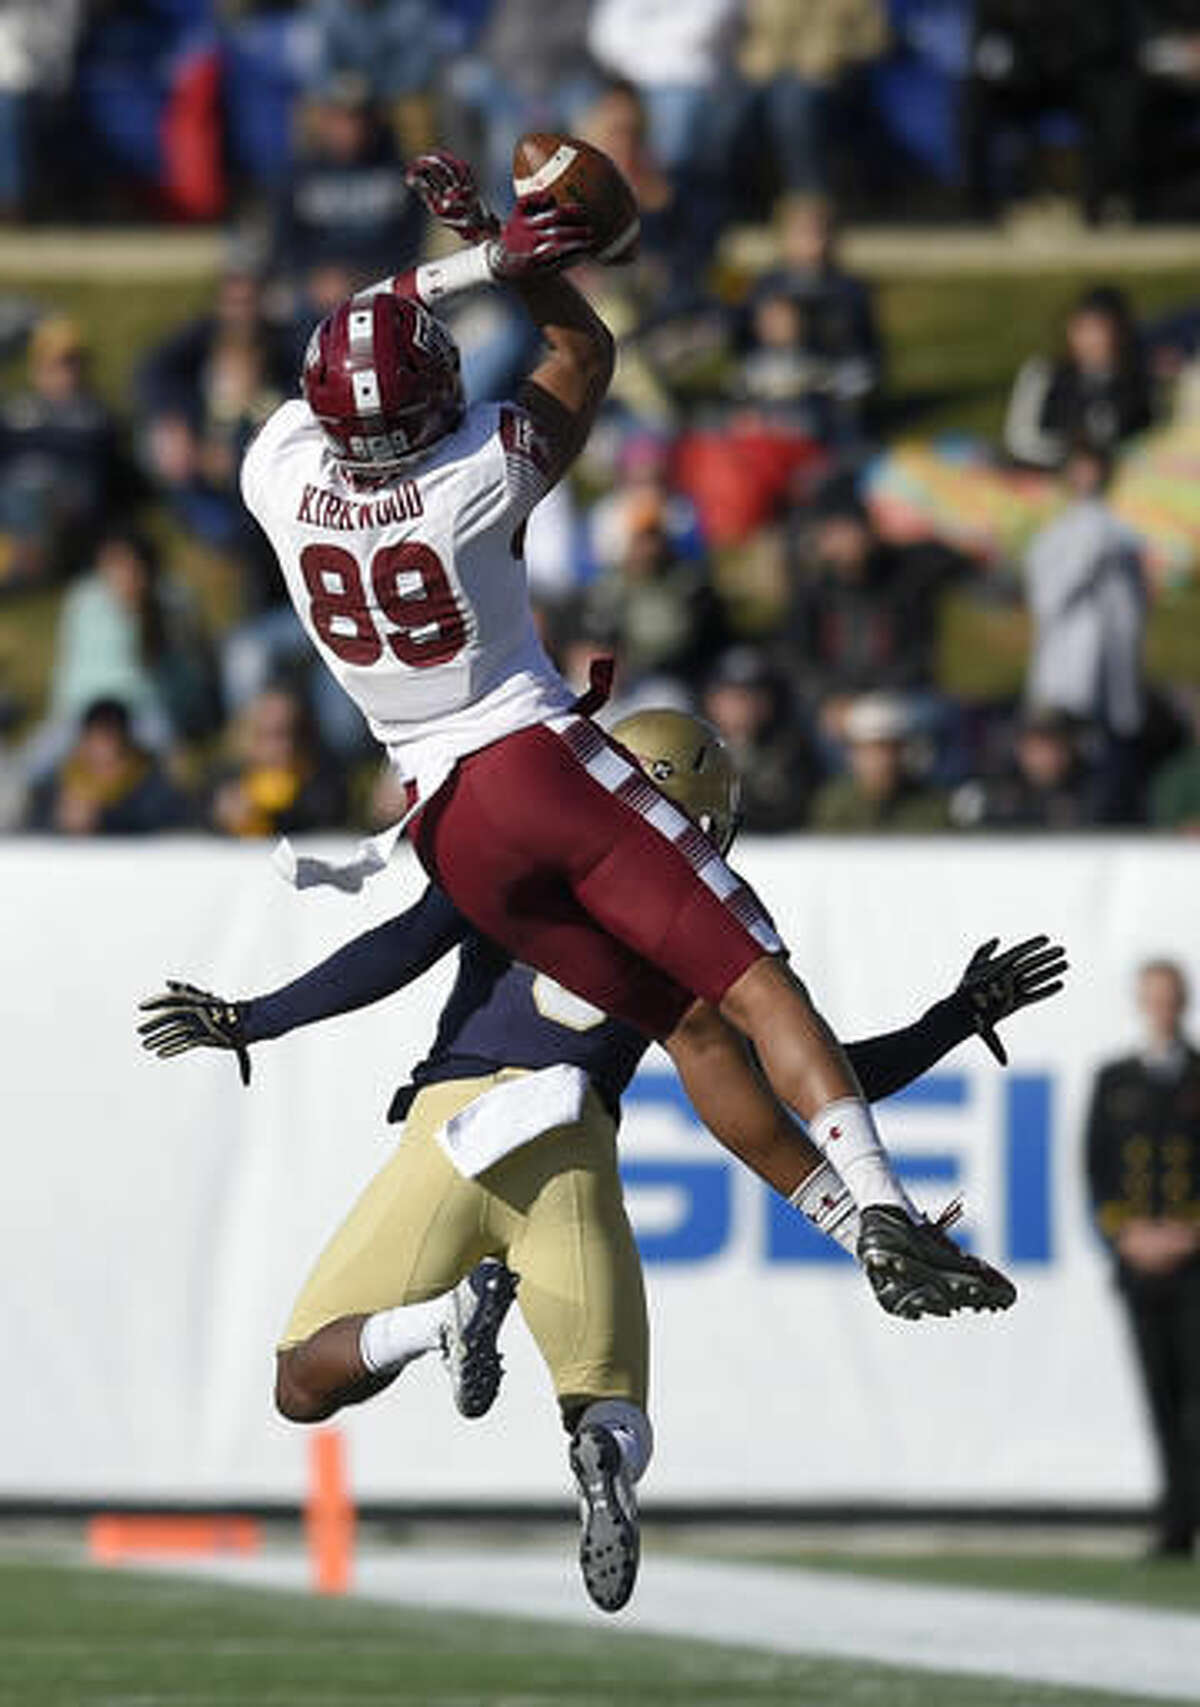 Temple wide receiver Keith Kirkwood (89) is unable to make a catch as Navy cornerback Jarid Ryan, back, defends during the first half of the American Athletic Conference championship NCAA college football game, Saturday, Dec. 3, 2016, in Annapolis, Md. (AP Photo/Nick Wass)